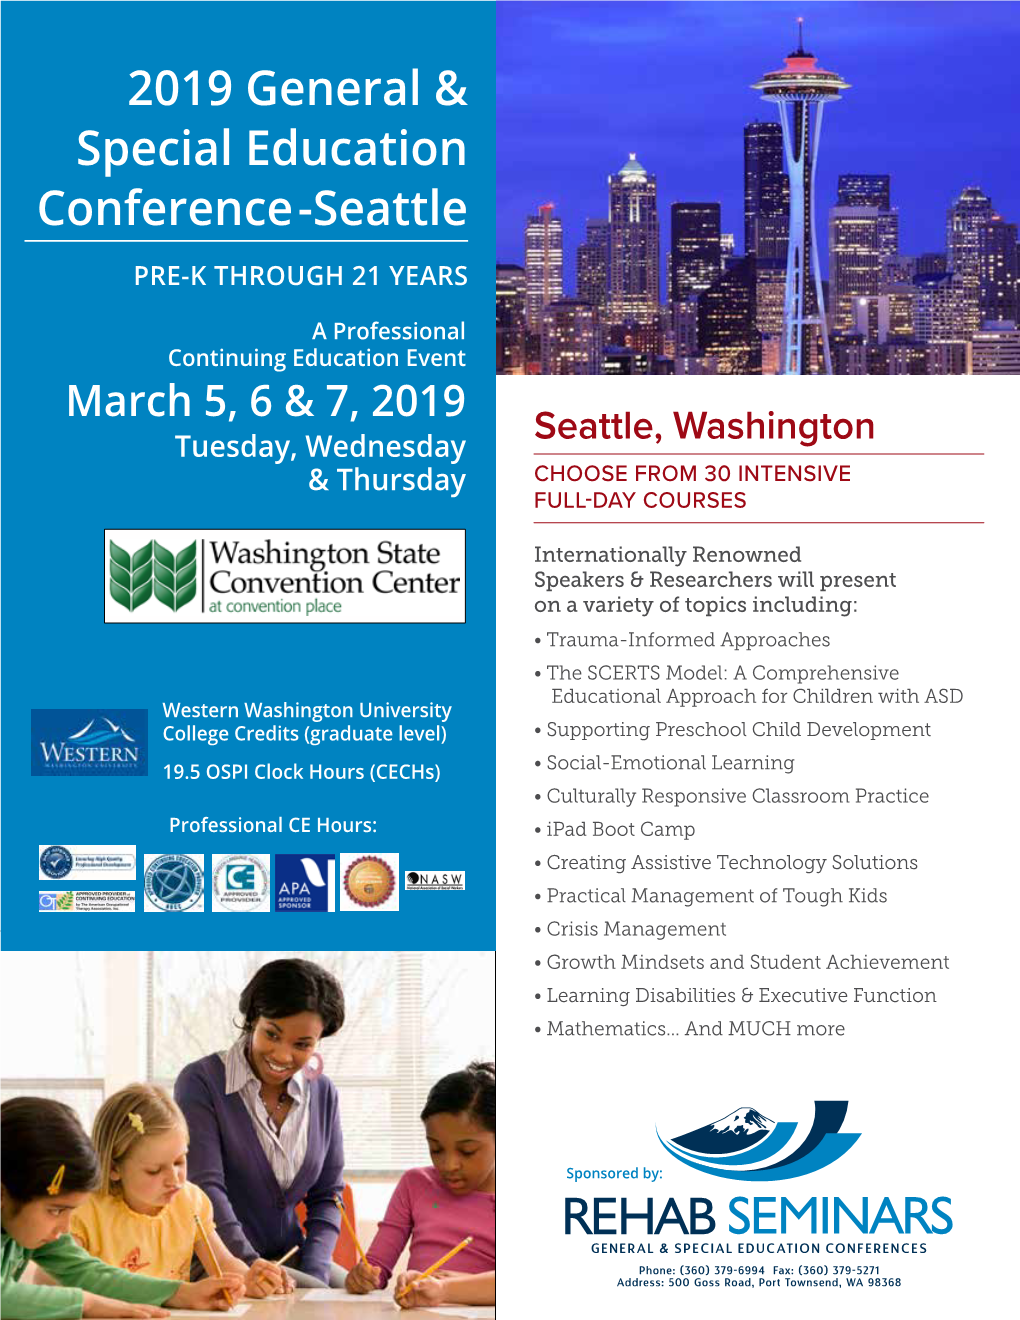 2019 General & Special Education Conference-Seattle